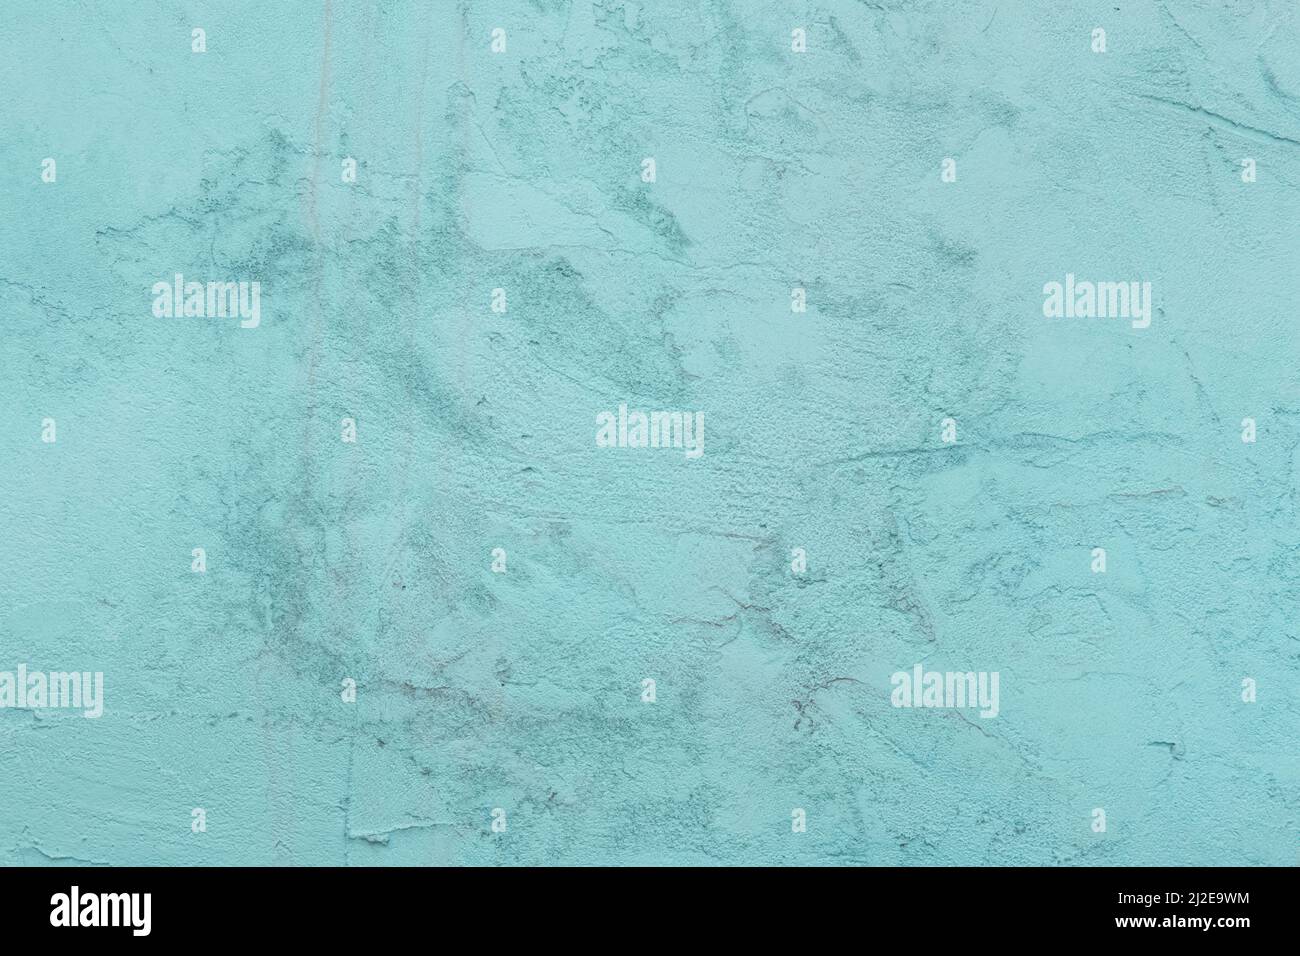 Aquamarine or azure light color abstract wall surface for design texture background. Stock Photo